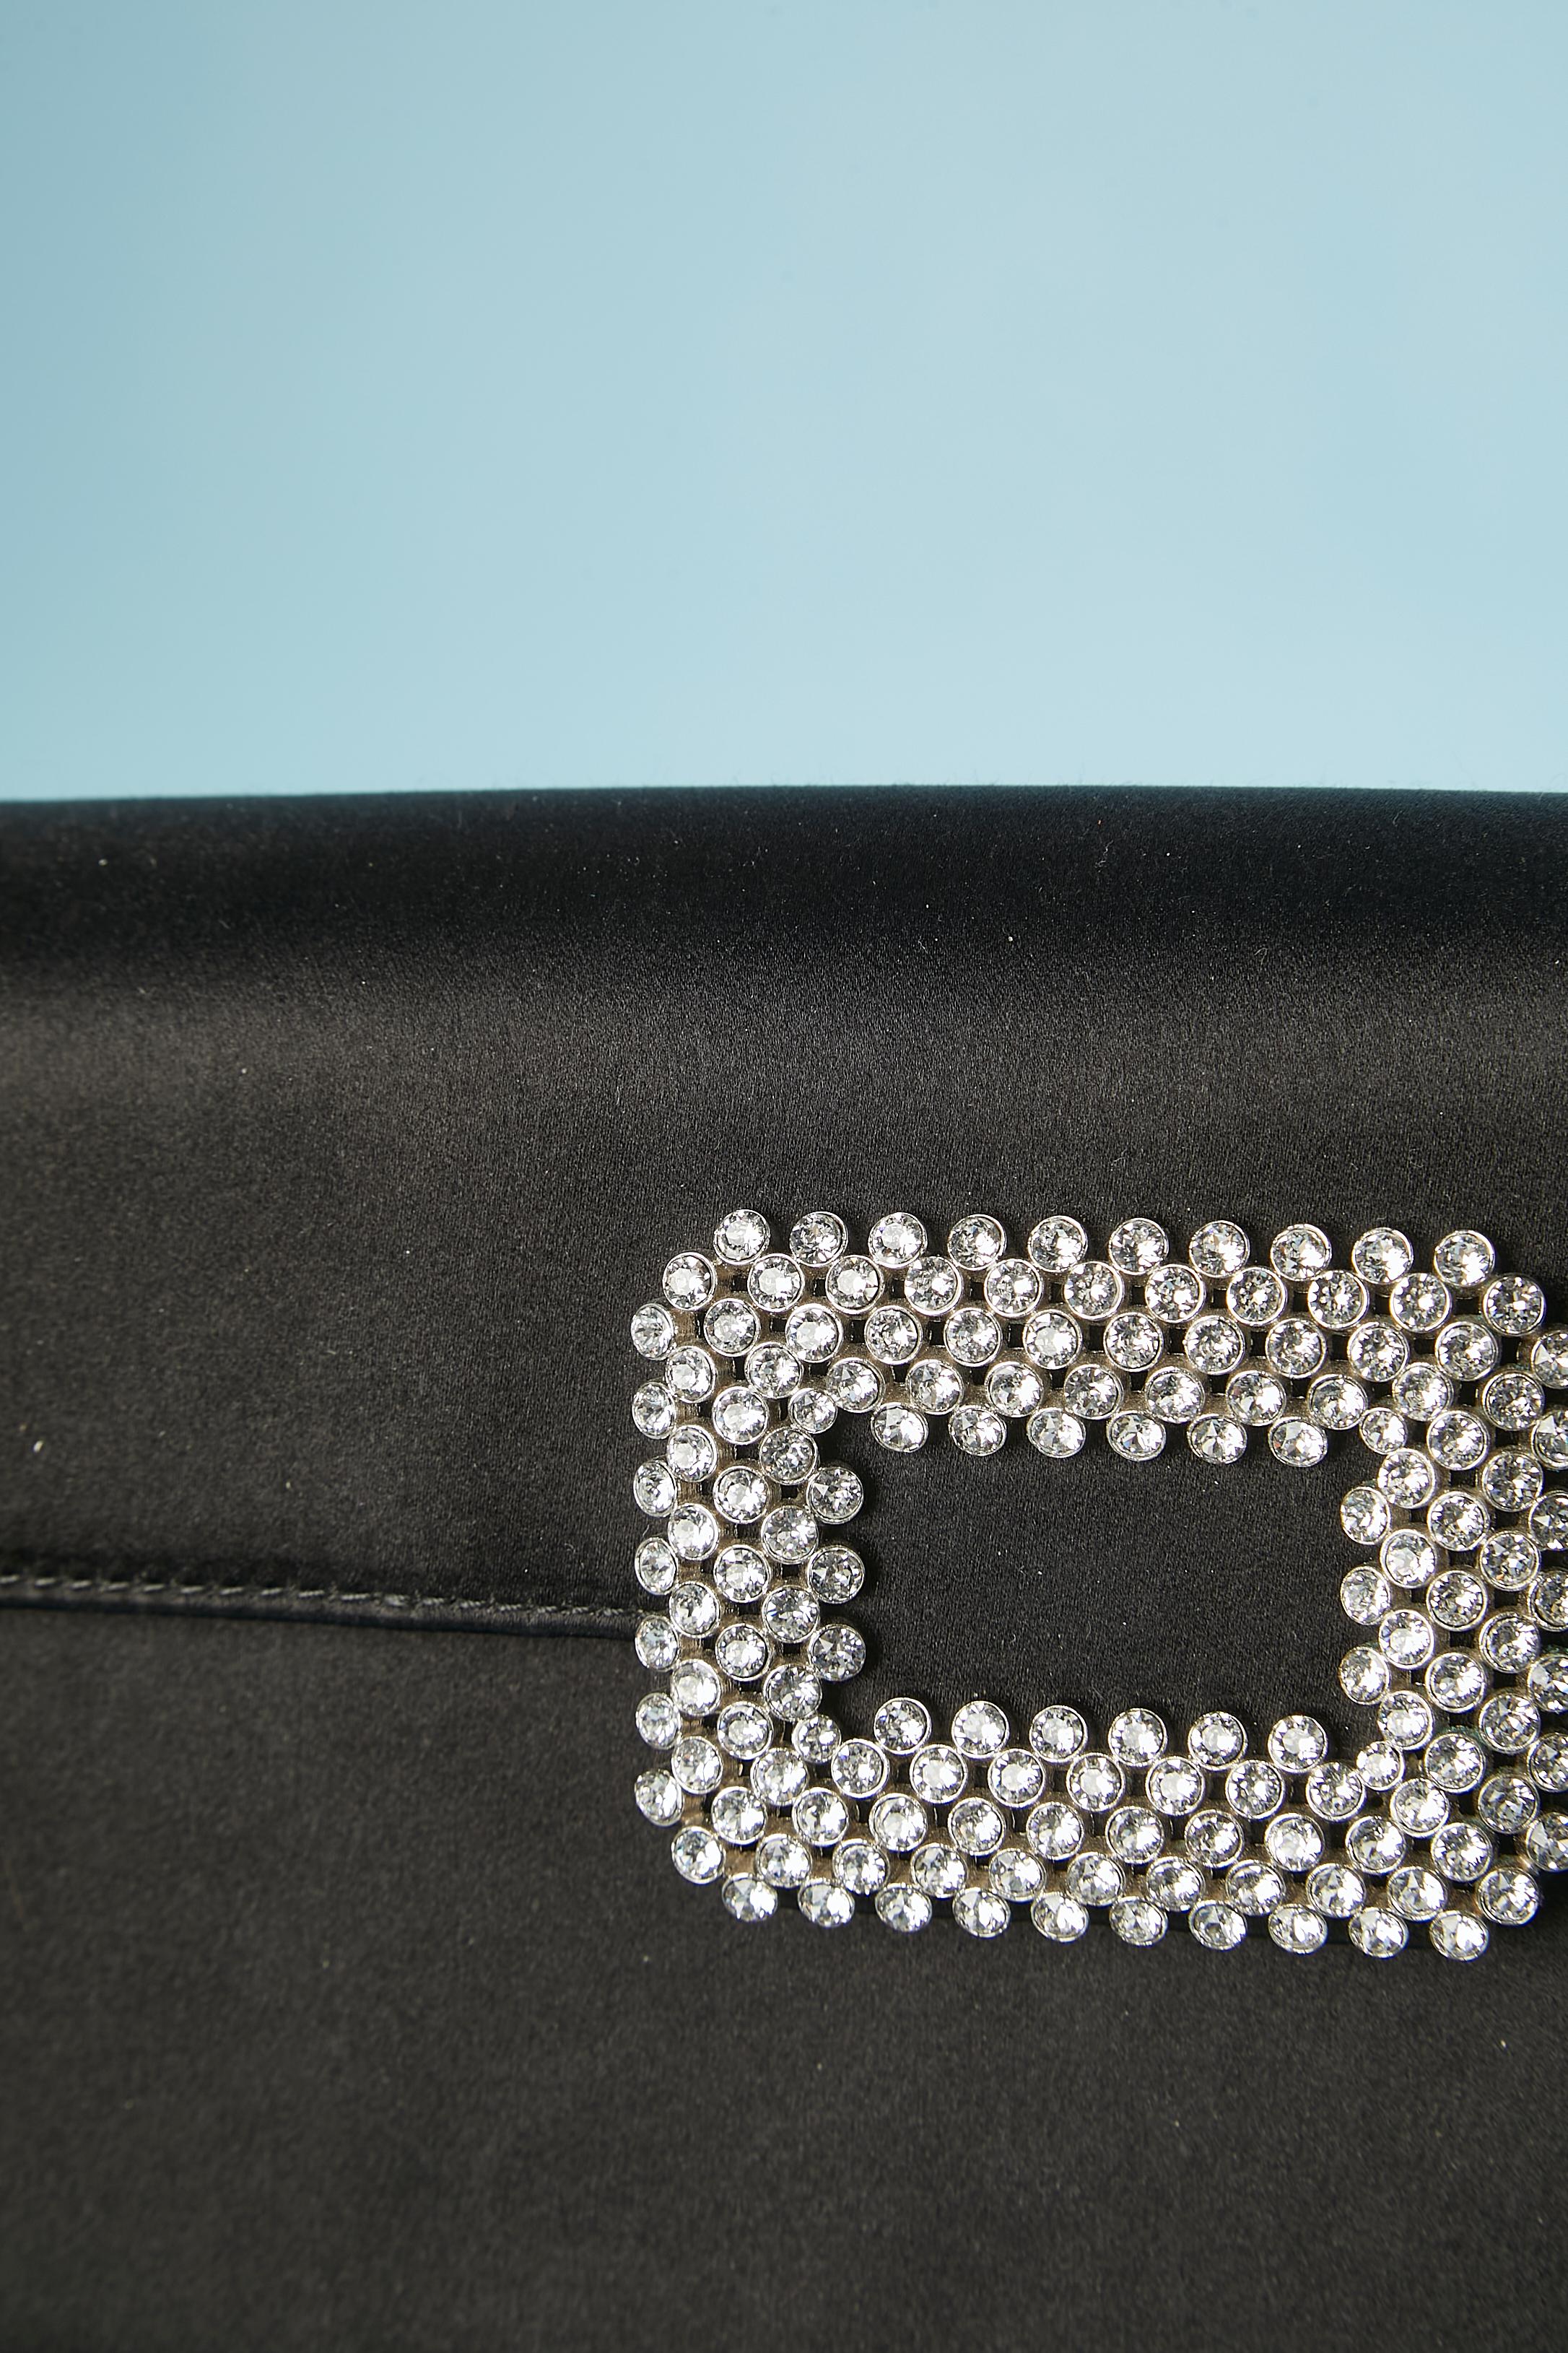 Black satin and rhinestone evening clutch. Snap to close it in the middle front. 2 compartment inside. Pale pink satin lining. One flat pocket inside. Silver metal chain
SIZE/ 23.5CM X 3CM X 14CM 